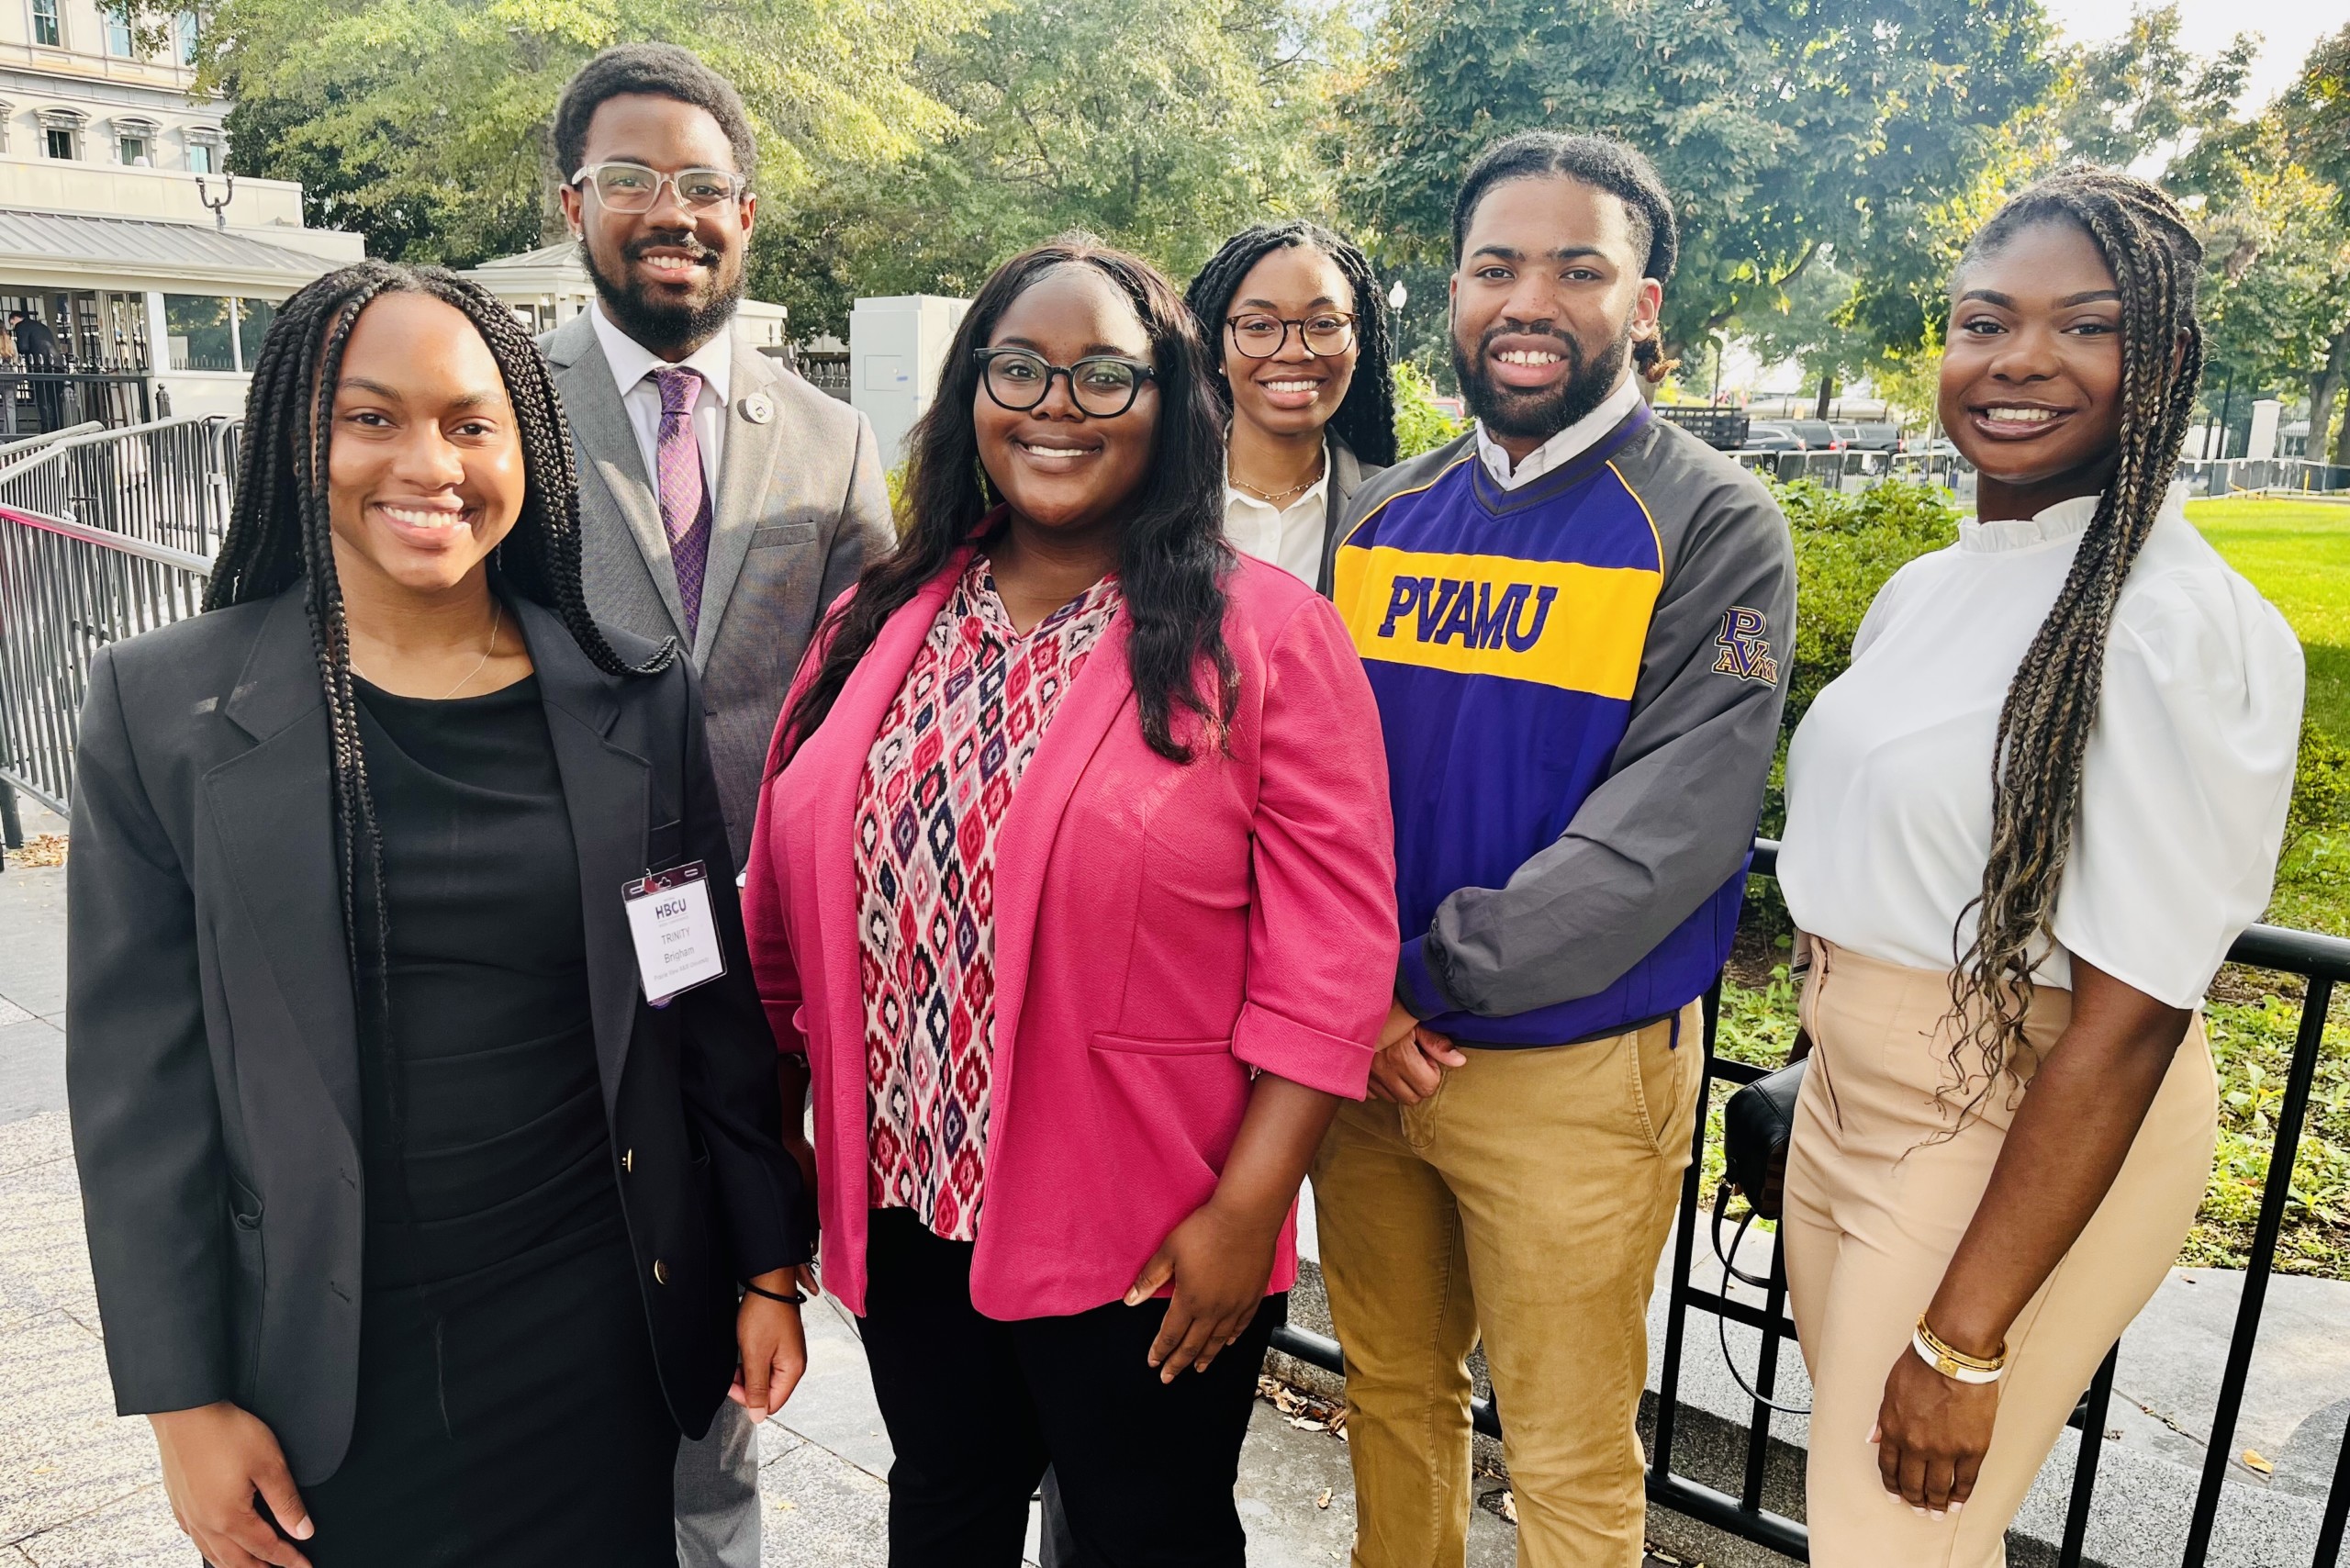 PVAMU shares first experience at 2022 National HBCU Week Conference